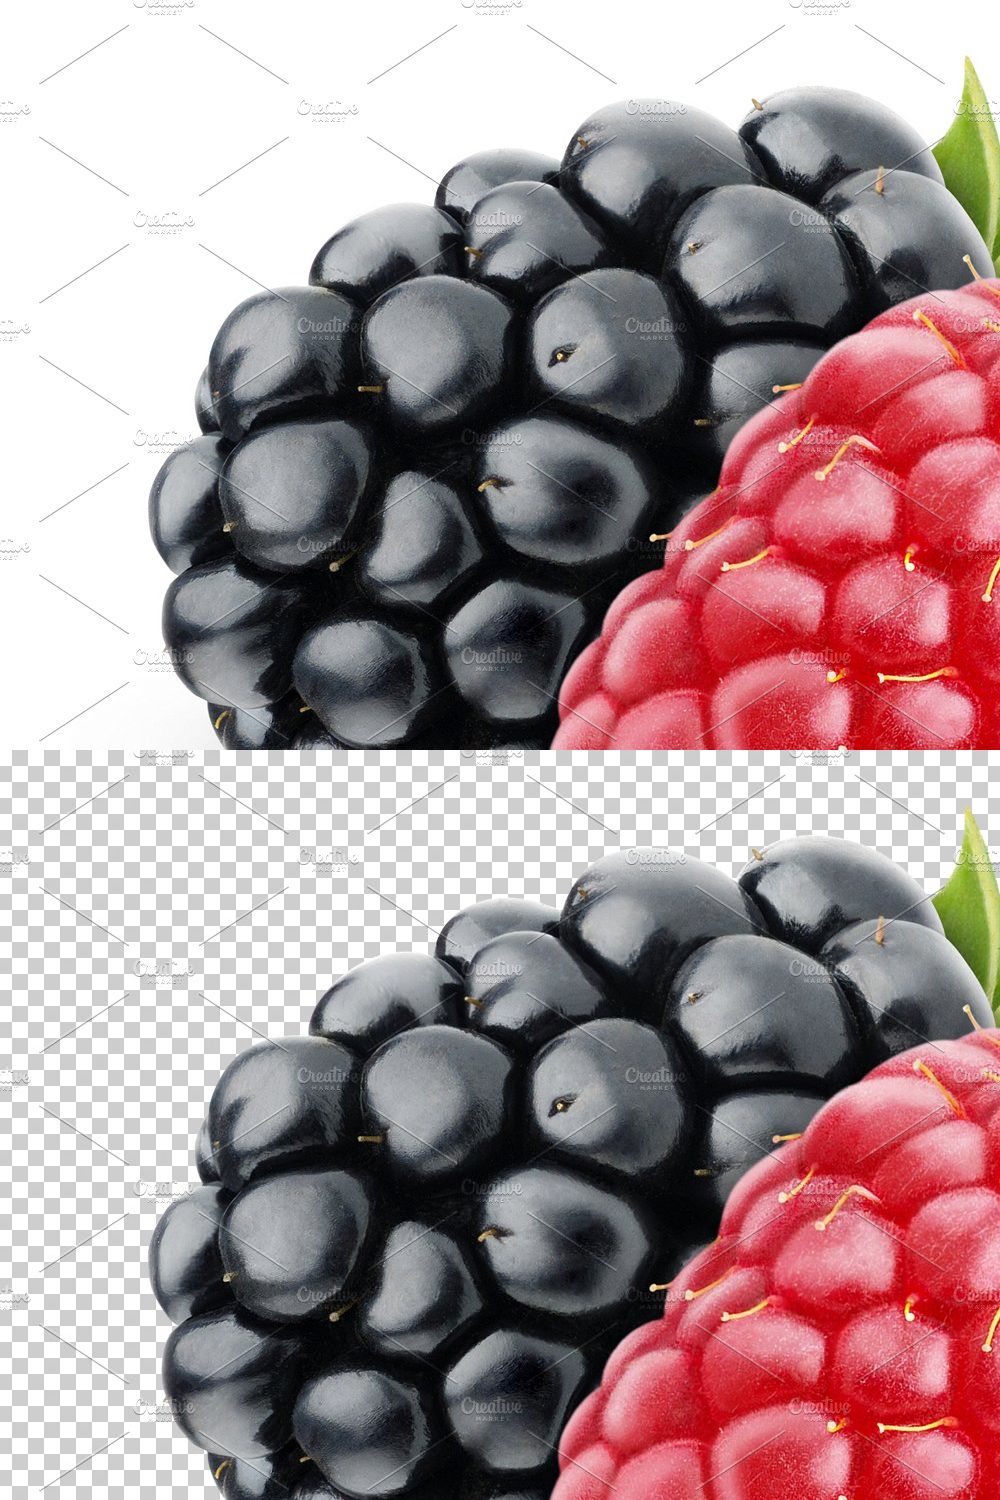 Raspberry and blackberry pinterest preview image.